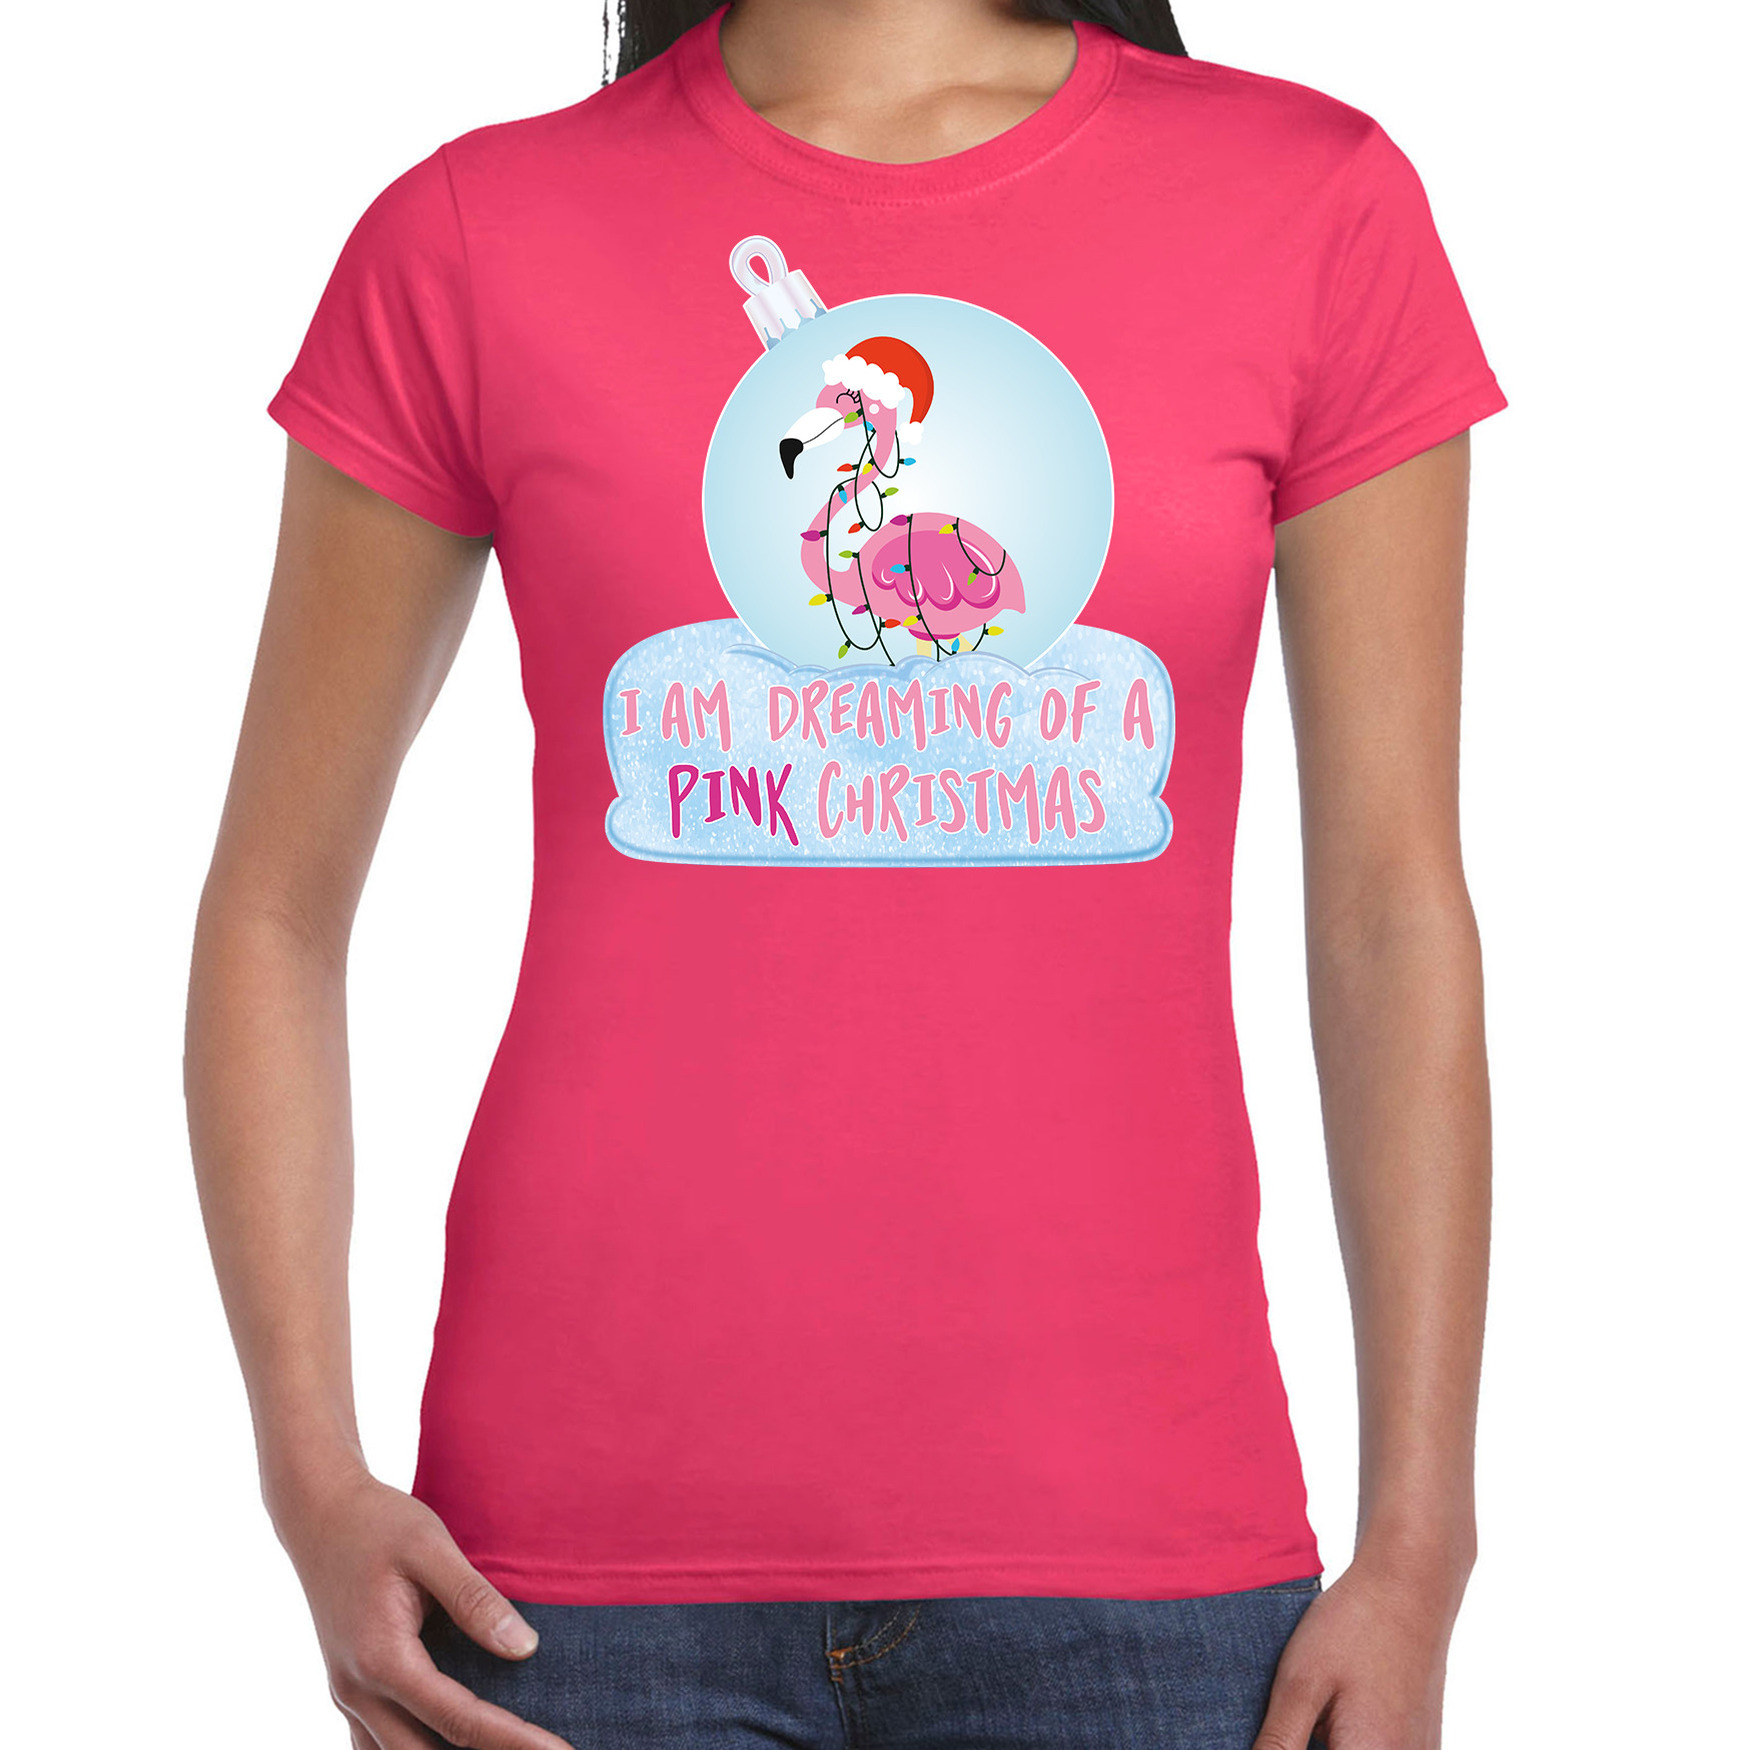 Flamingo Kerstbal shirt-Kerst outfit I am dreaming of a pink Christmas roze voor dames